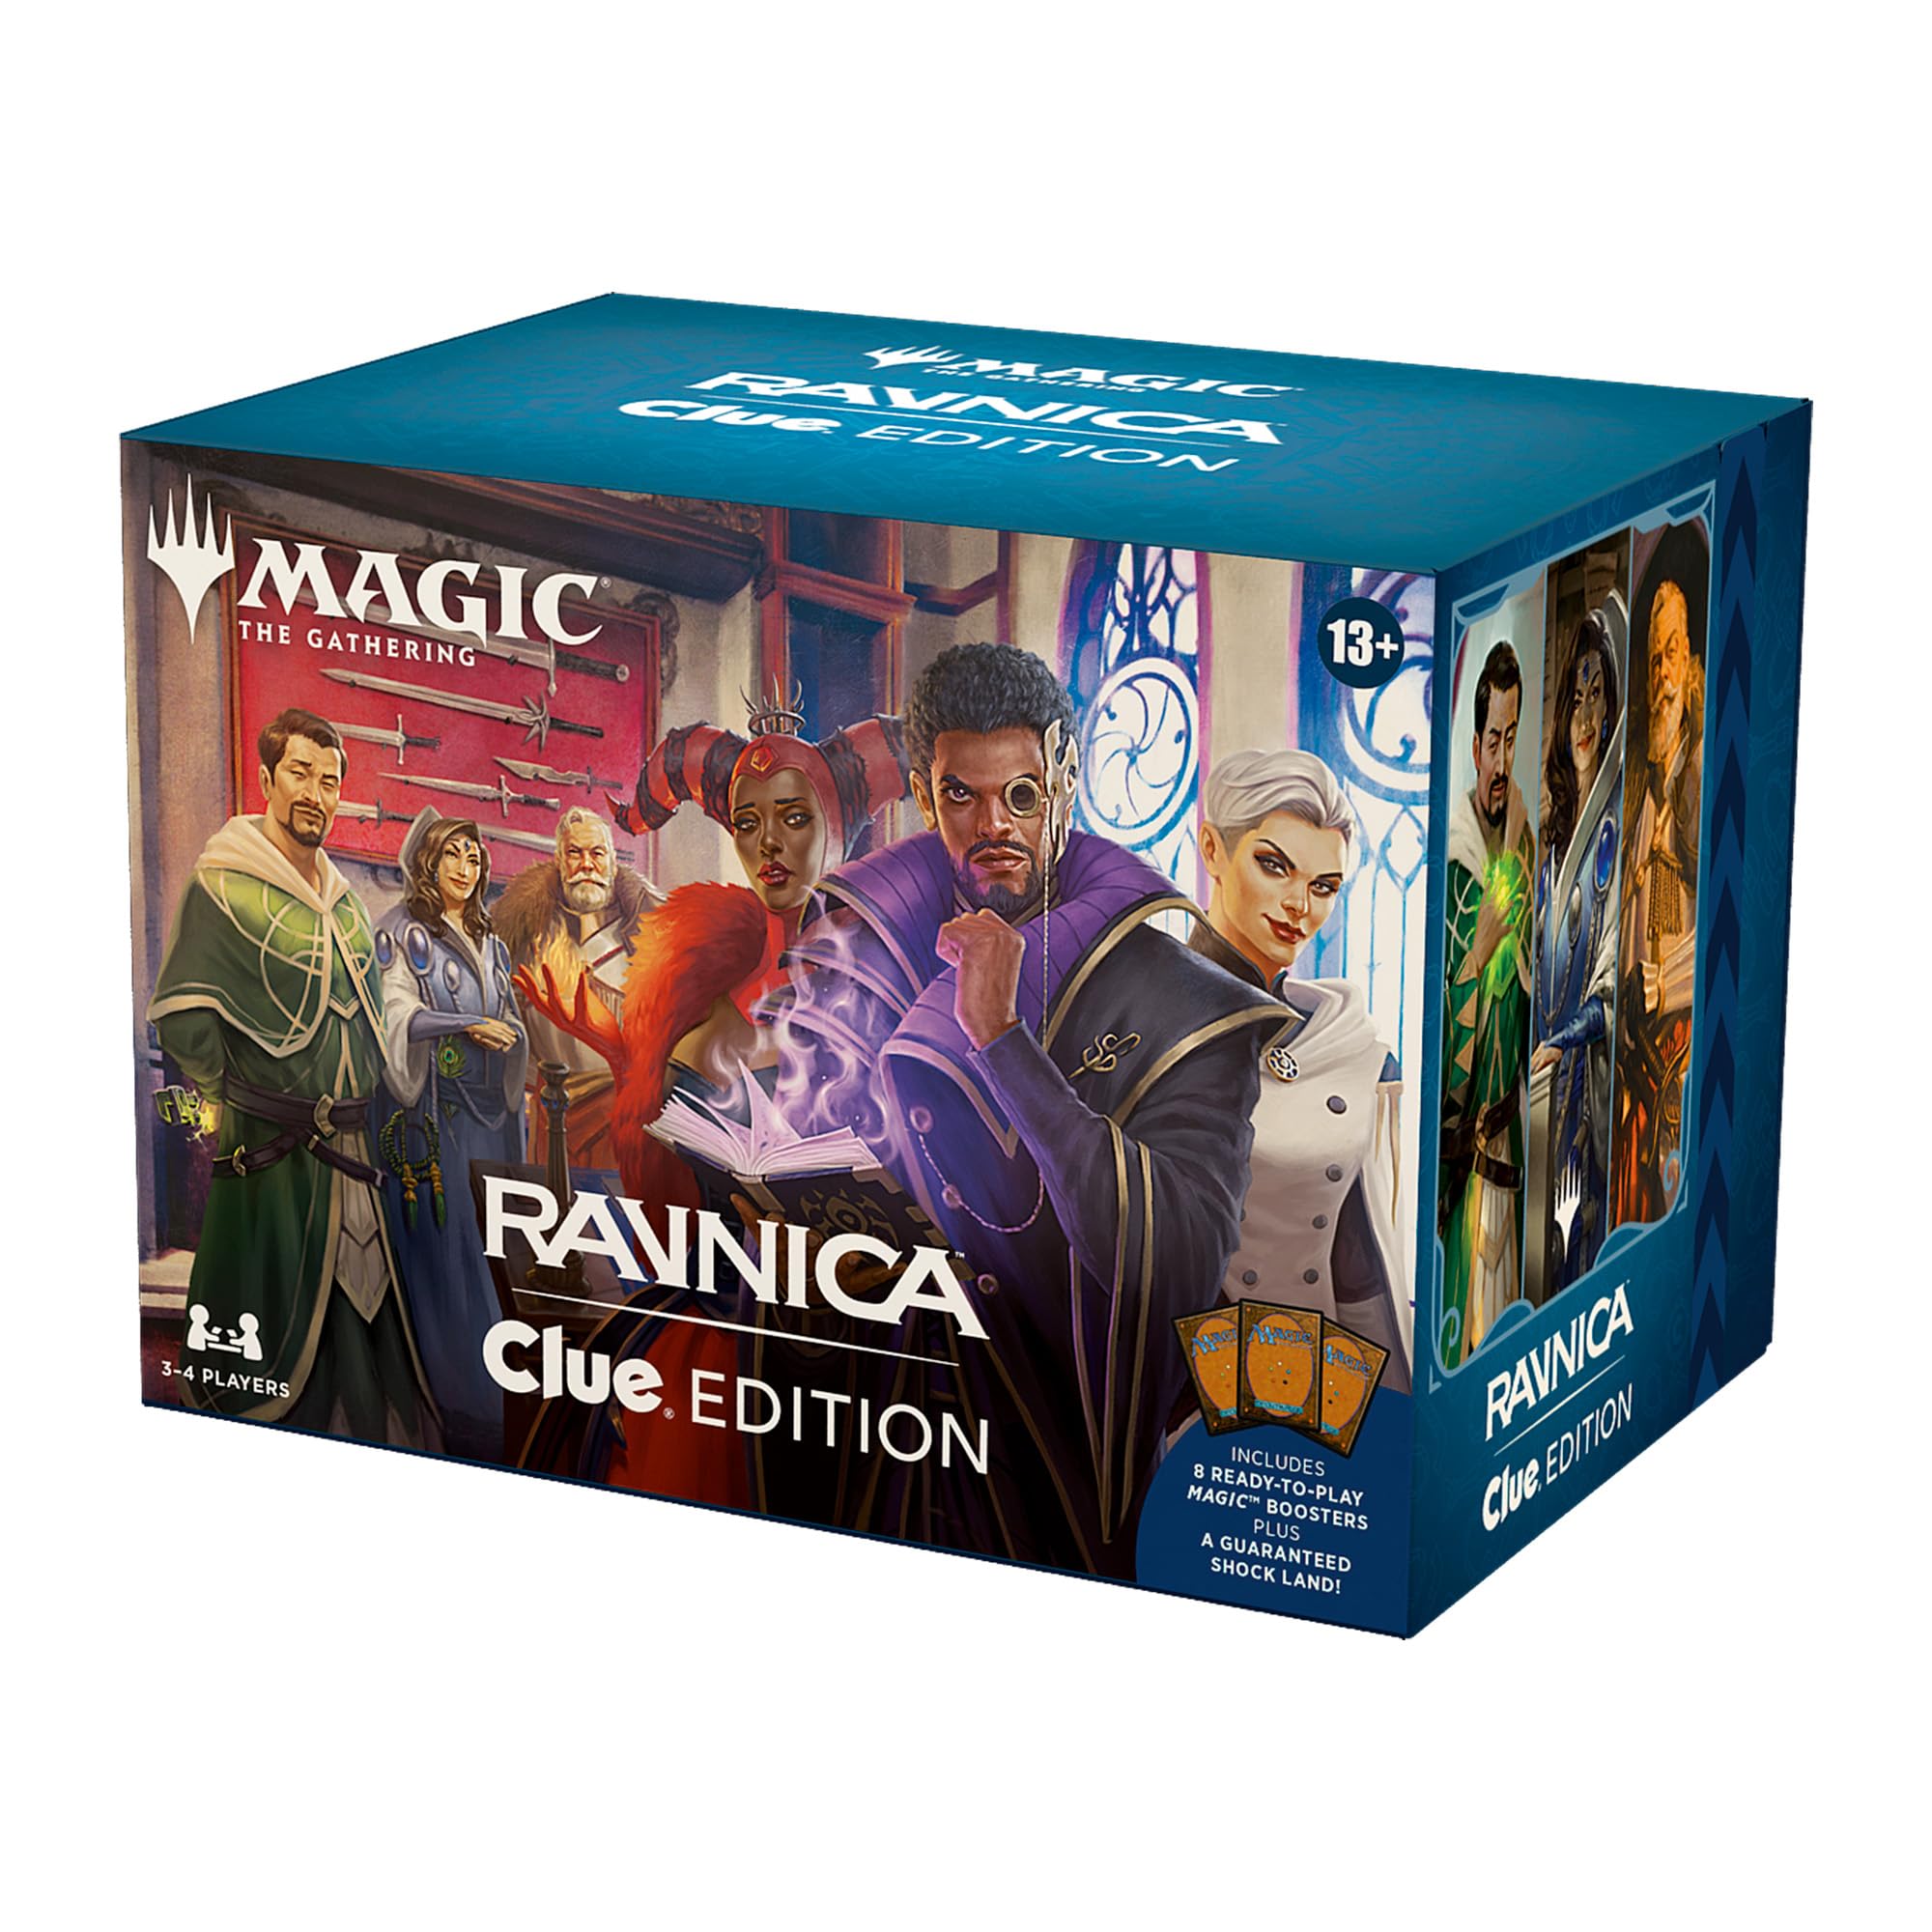 Magic: The Gathering Ravnica: Clue Edition  $41.45 + Free Shipping